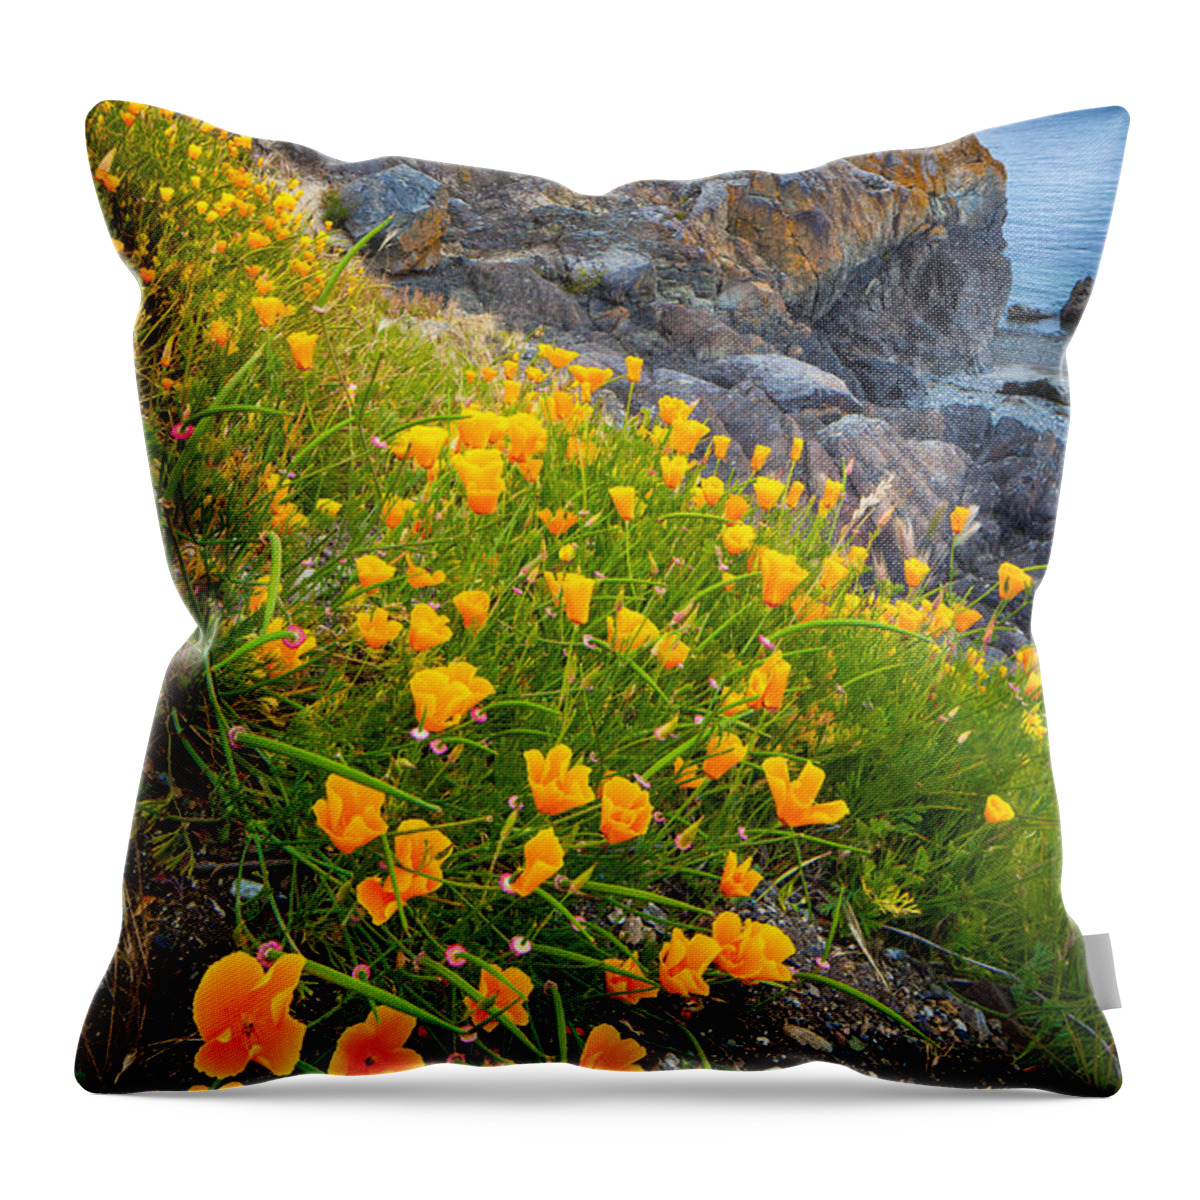 America Throw Pillow featuring the photograph San Juan Poppies by Inge Johnsson